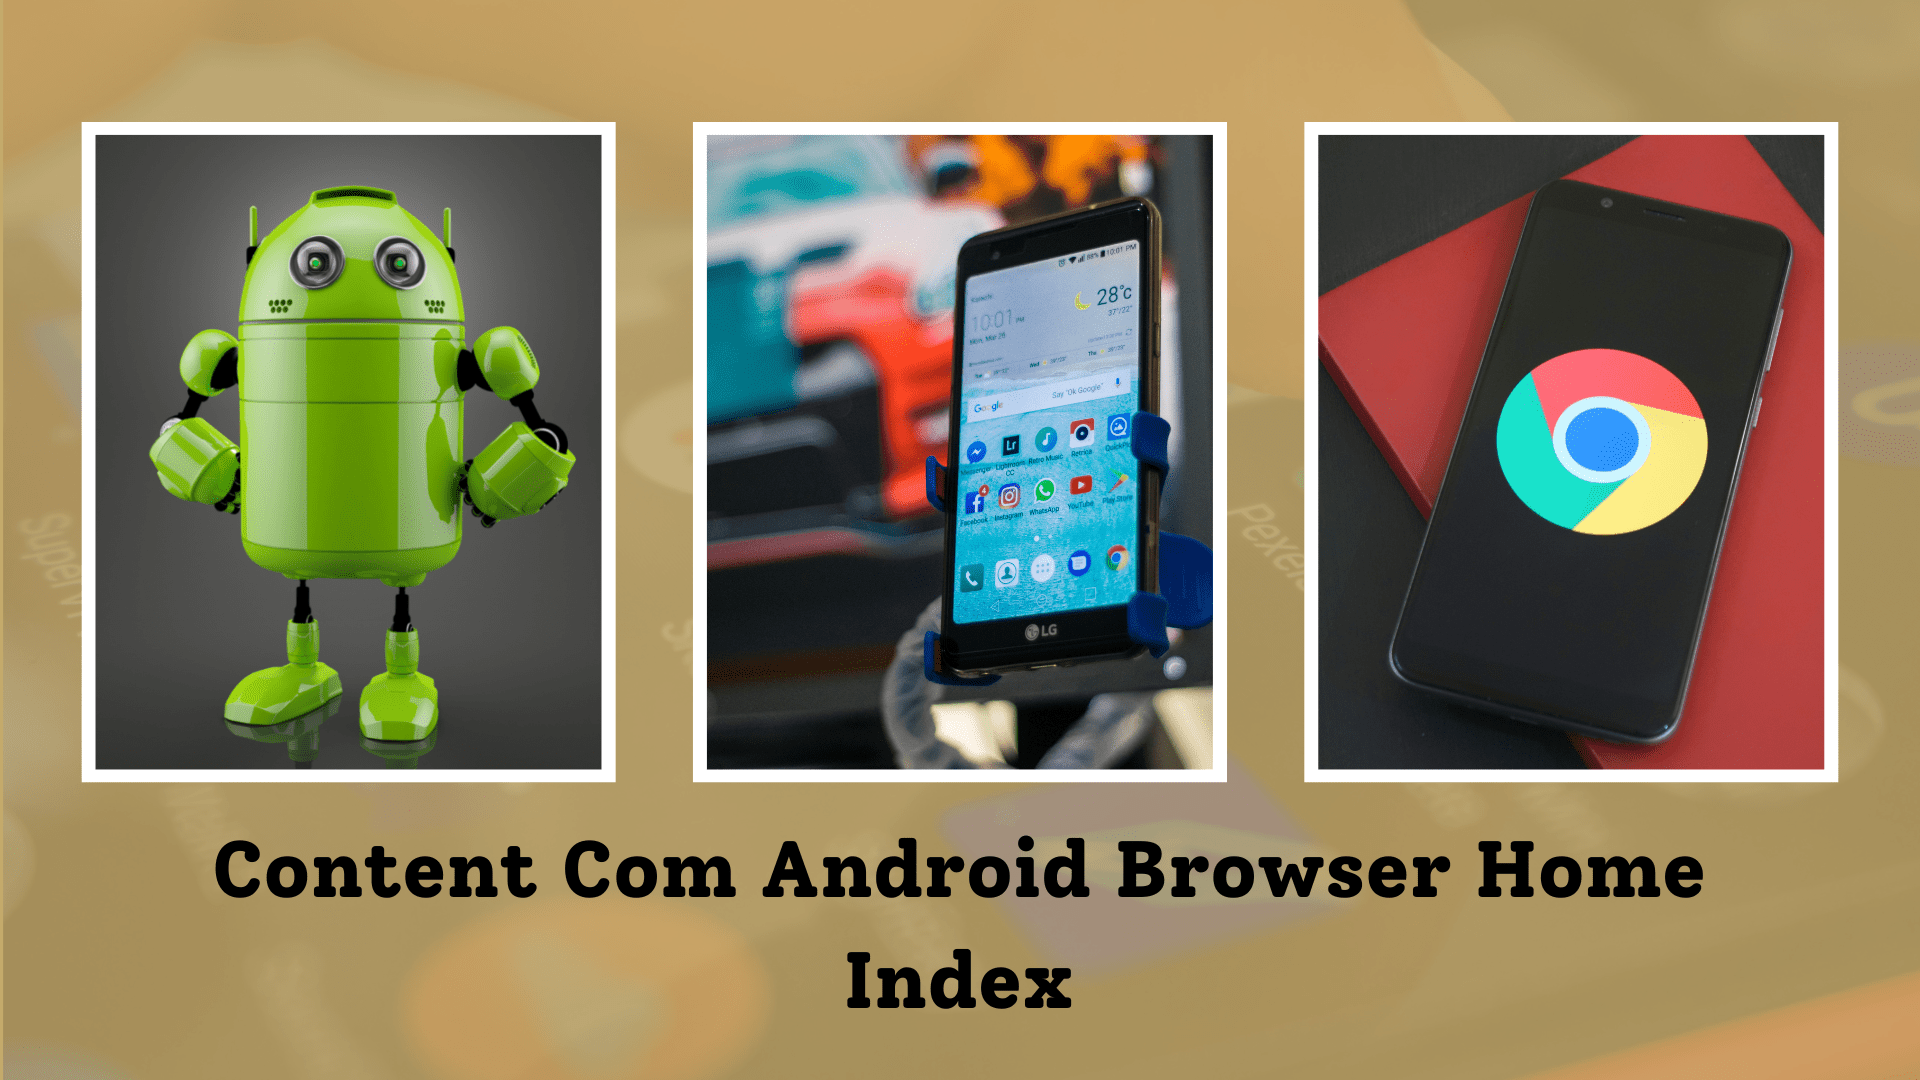 Content Com Android Browser Home Index